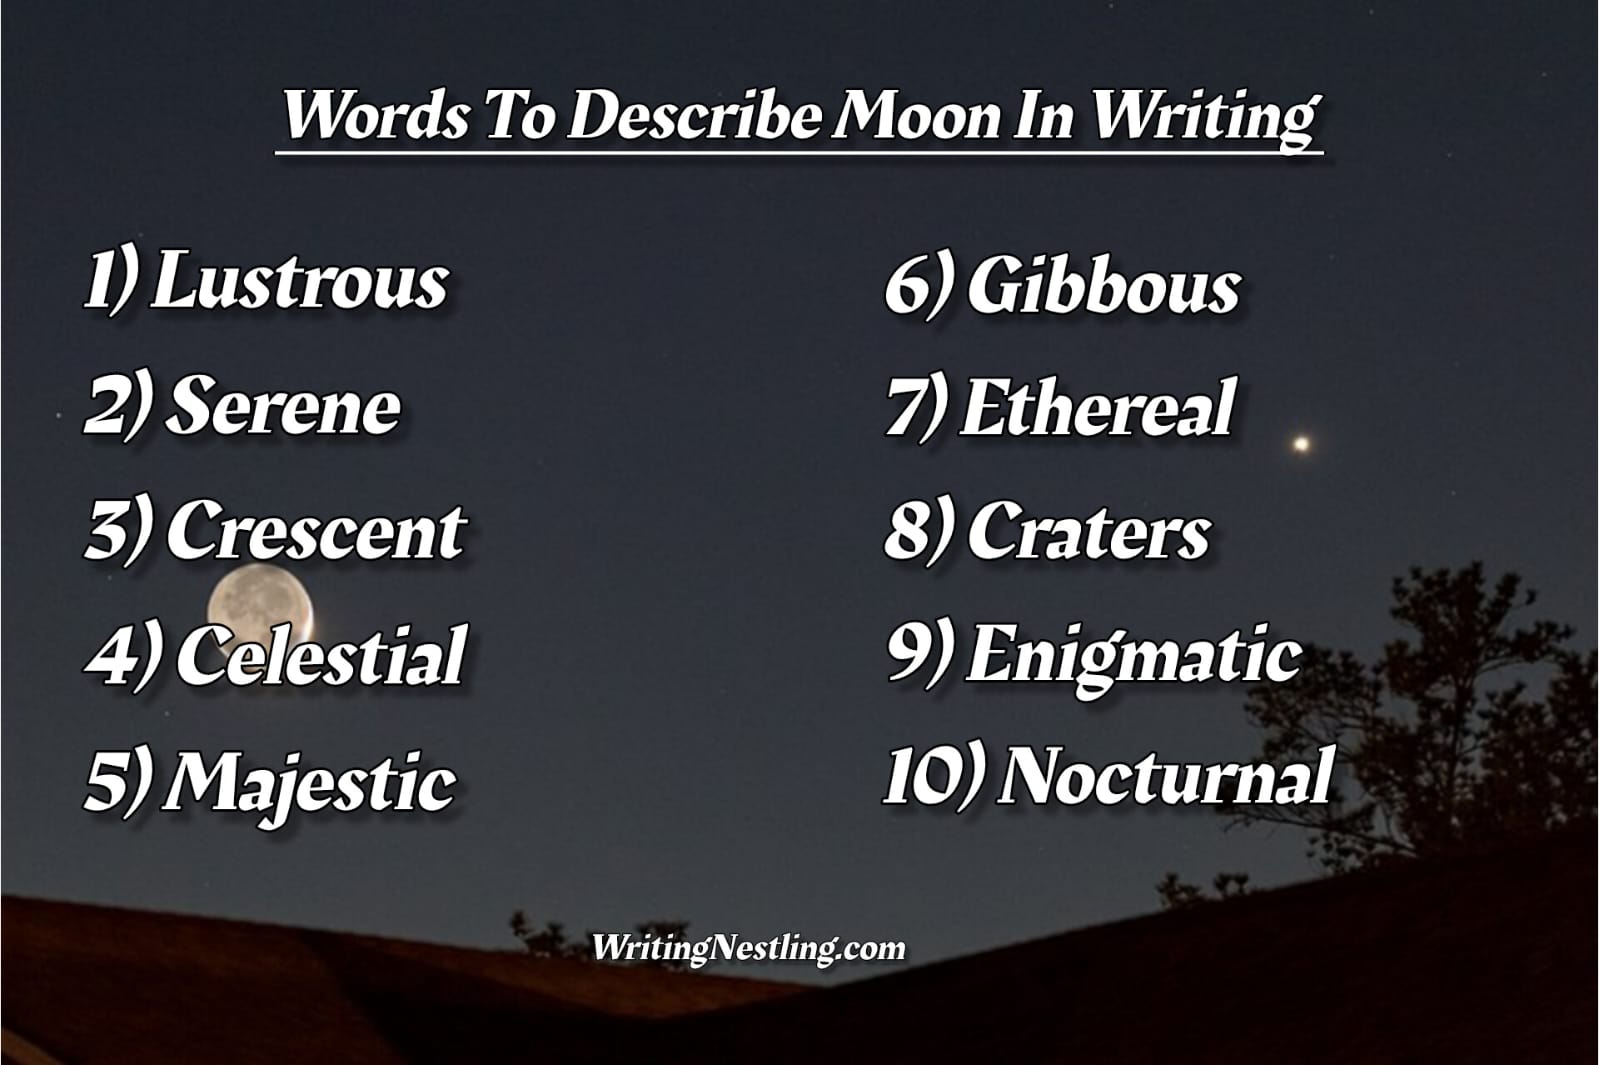 How To Describe Moon In Writing